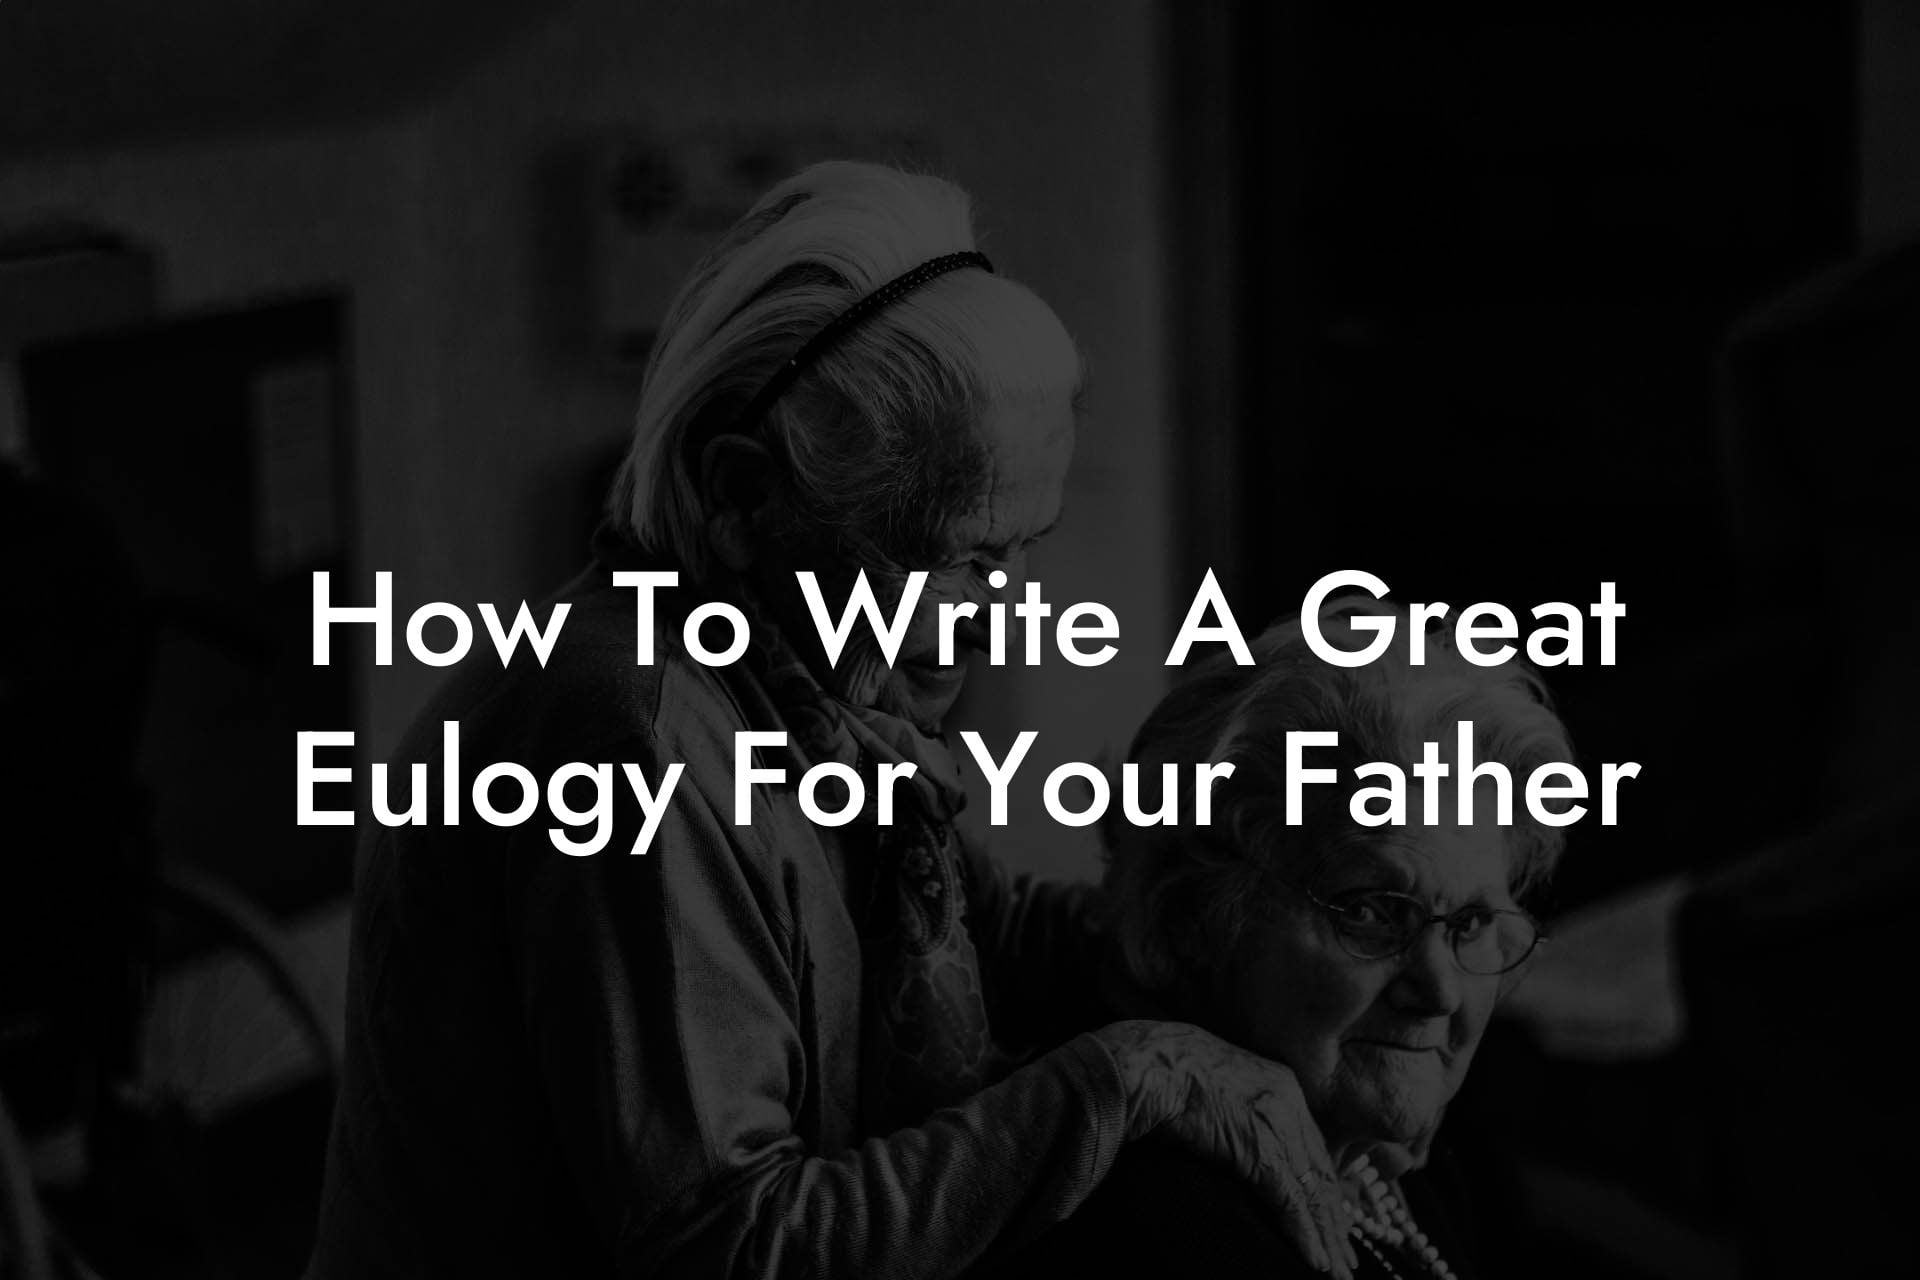 How To Write A Great Eulogy For Your Father